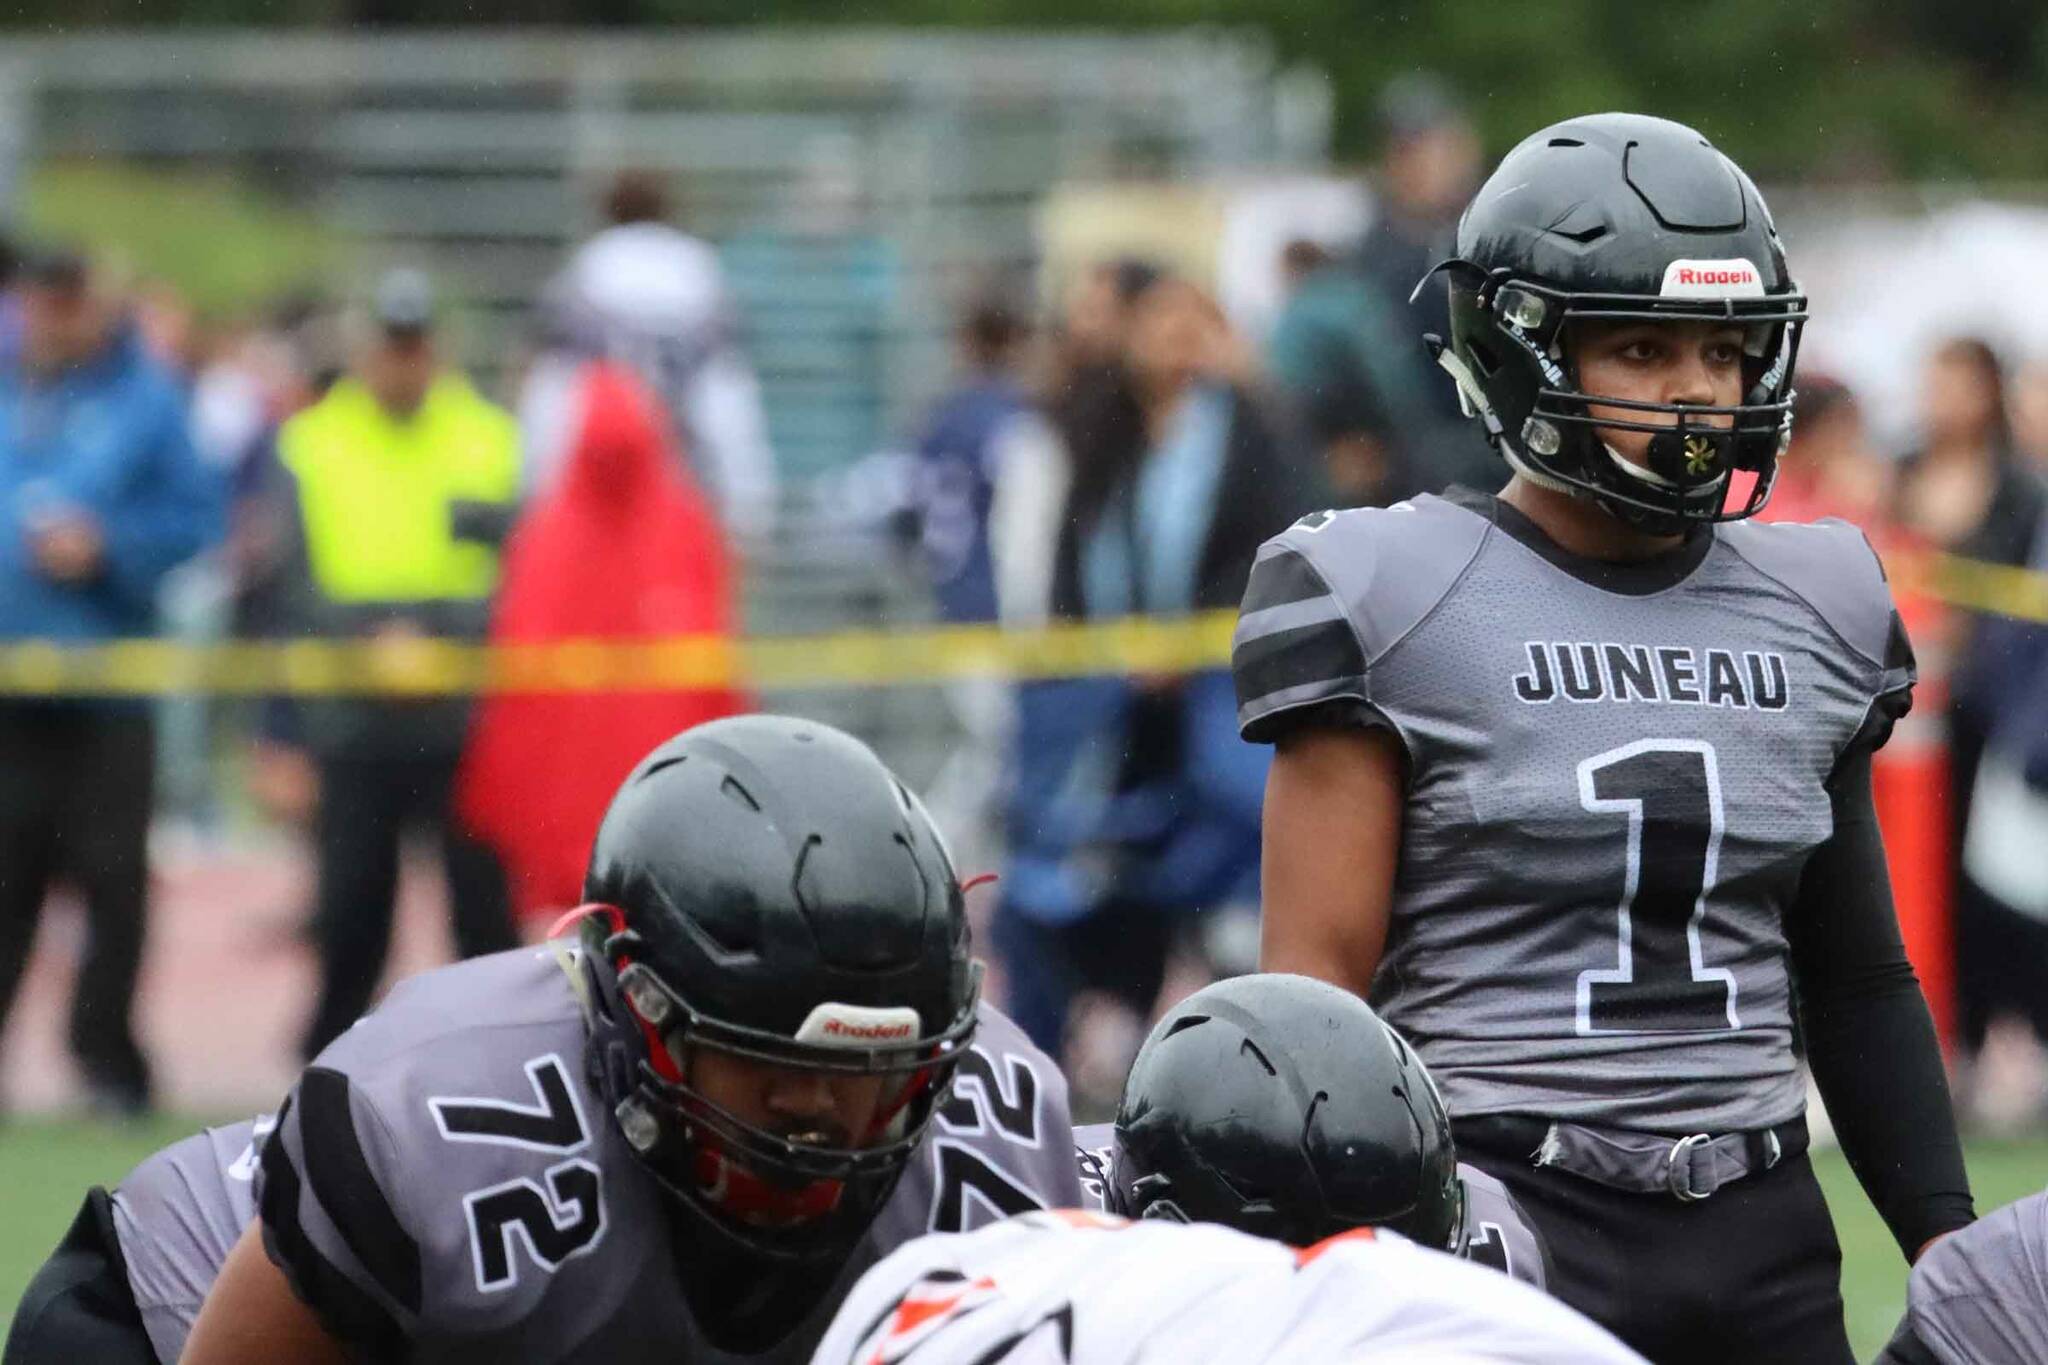 Jarrell Williams, who scored five TDs against South Anchorage to help Juneau maintain an undefeated record, looks over the line of scrimmage in an Aug. 27 game against West Anchorage High School. (Ben Hohenstatt / Juneau Empire File)